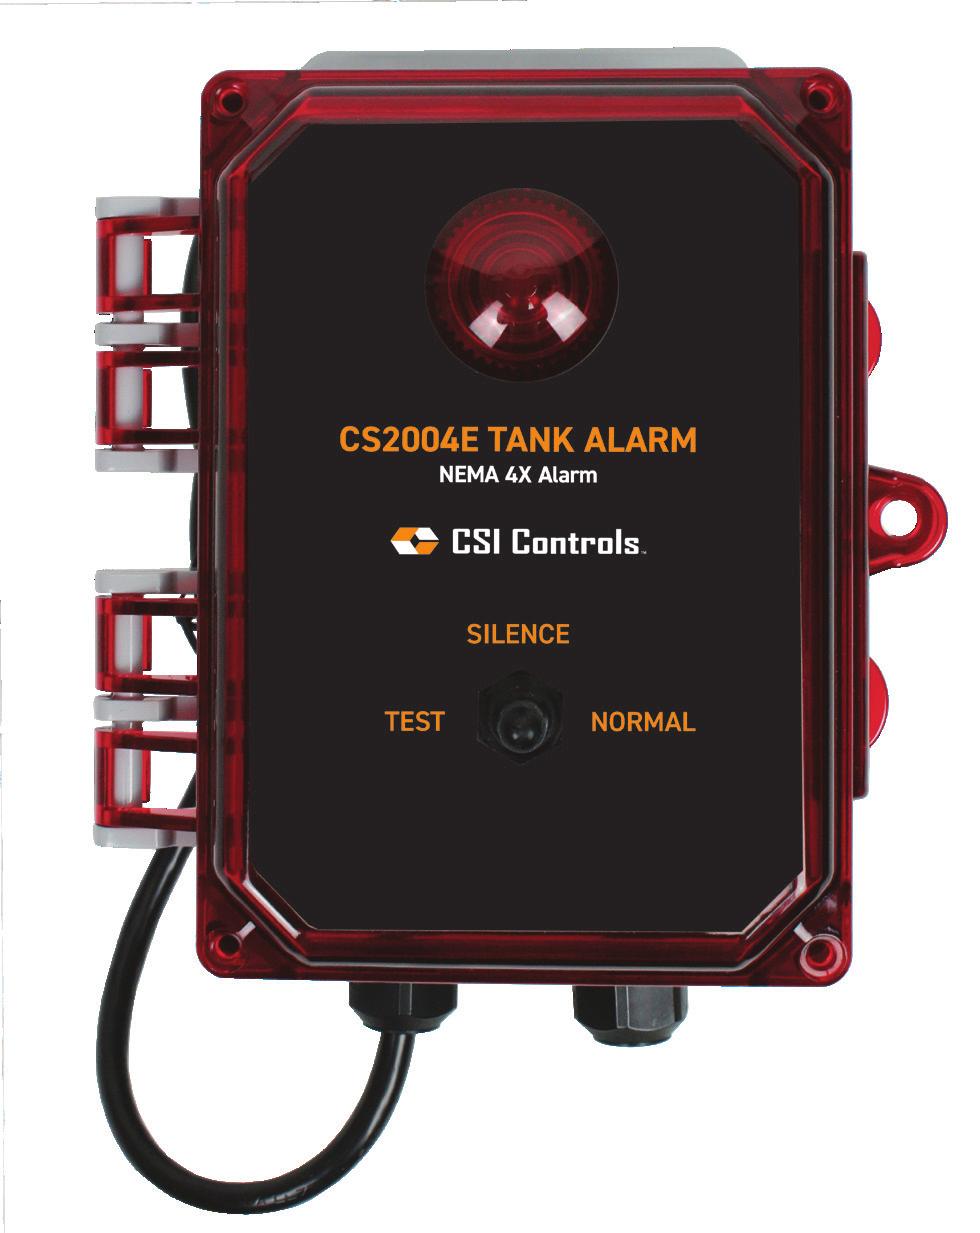 CS2004E Alarm System Indoor/Outdoor Alarm System with Auto Reset This alarm system monitors liquid levels in lift pump chambers, sump pump basins, holding tanks, sewage, agricultural, and other water